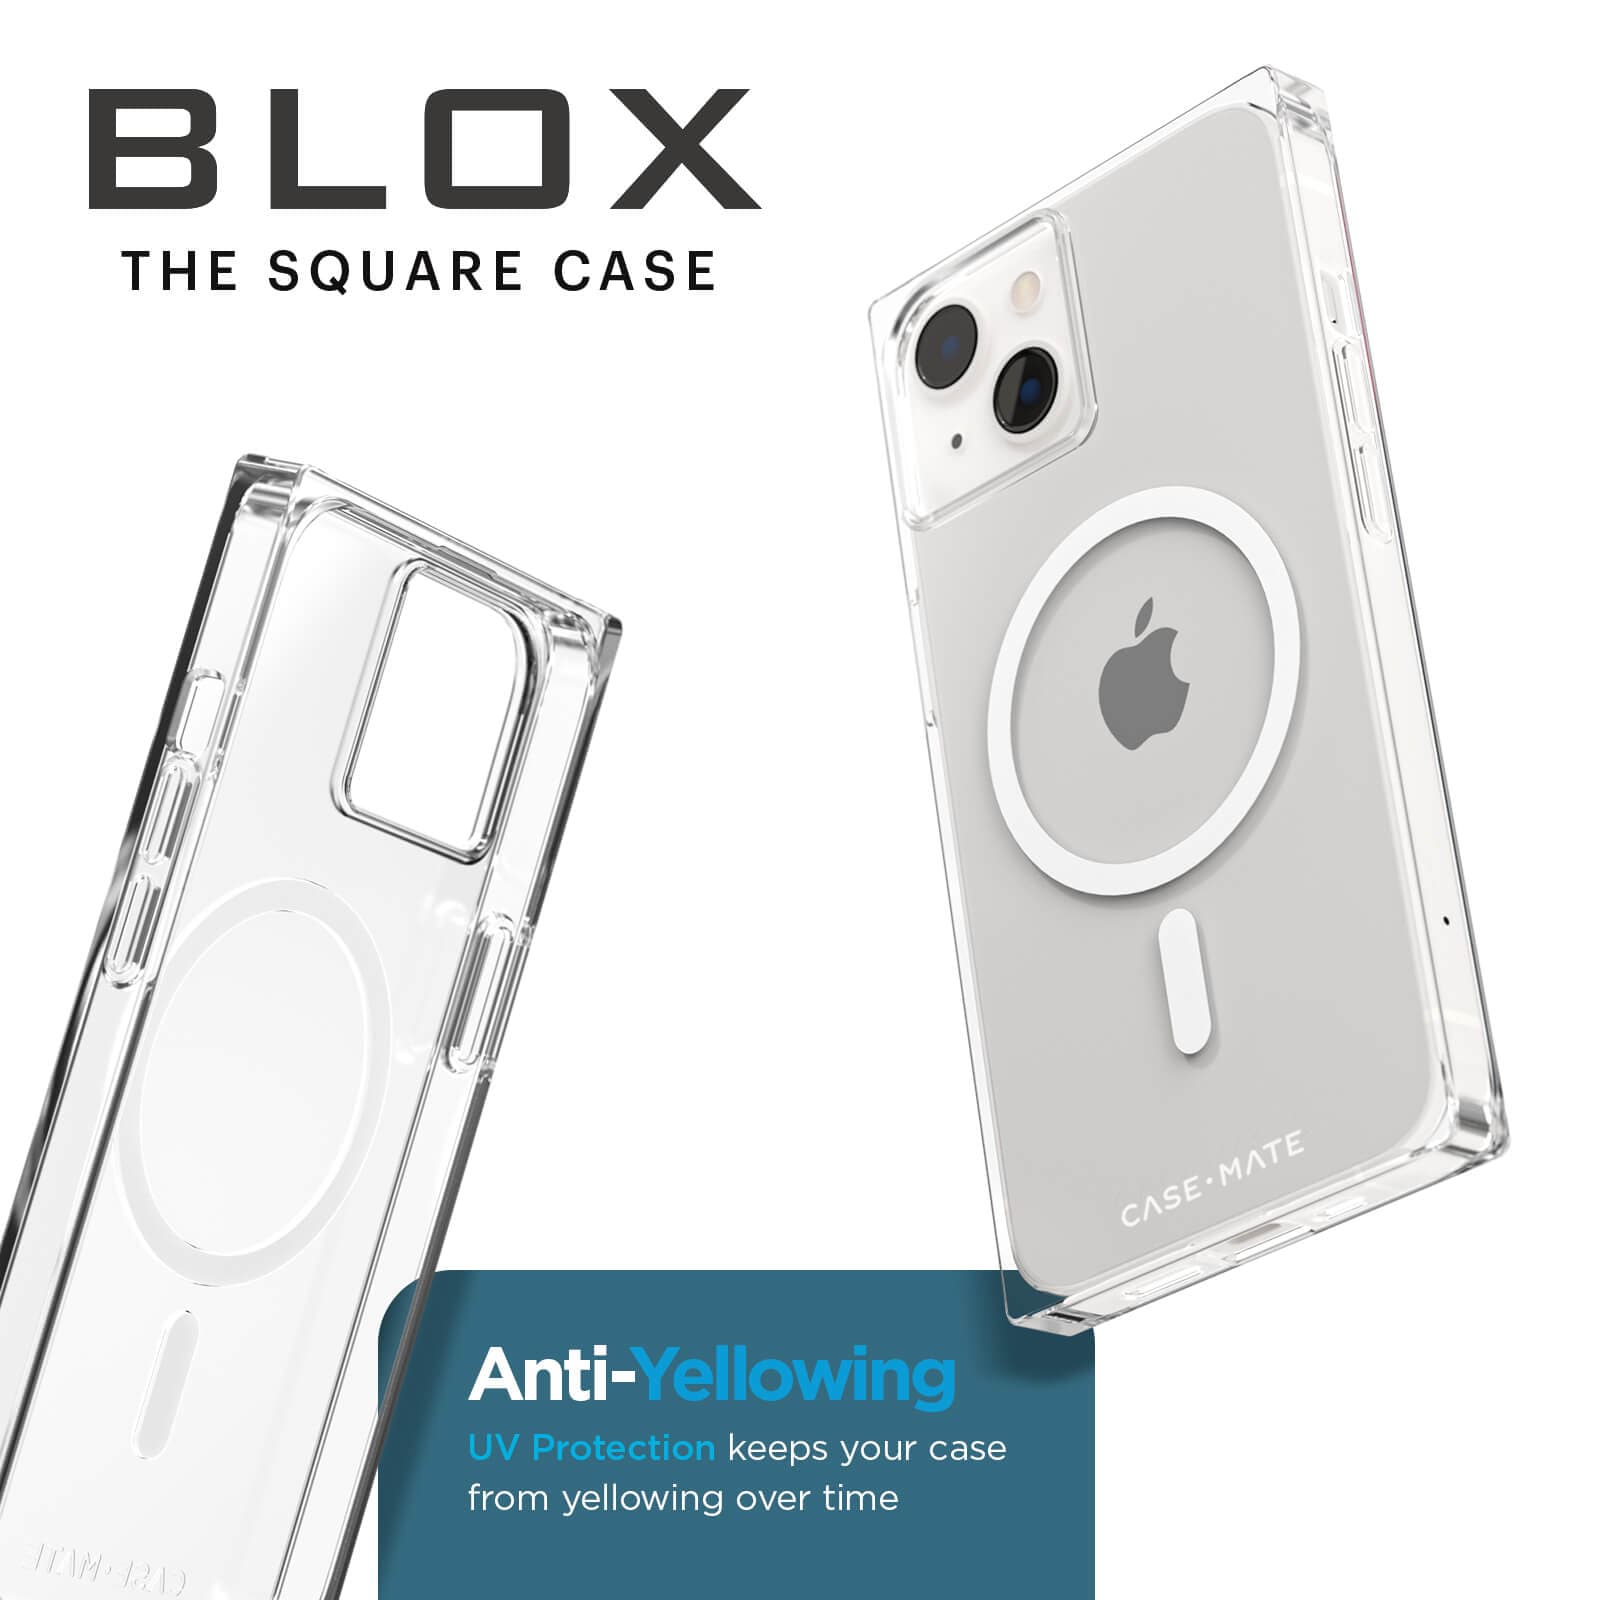 BLOX The Square Case. Anti-yellowing UV protection keeps your case from yellowing over time. color::Clear